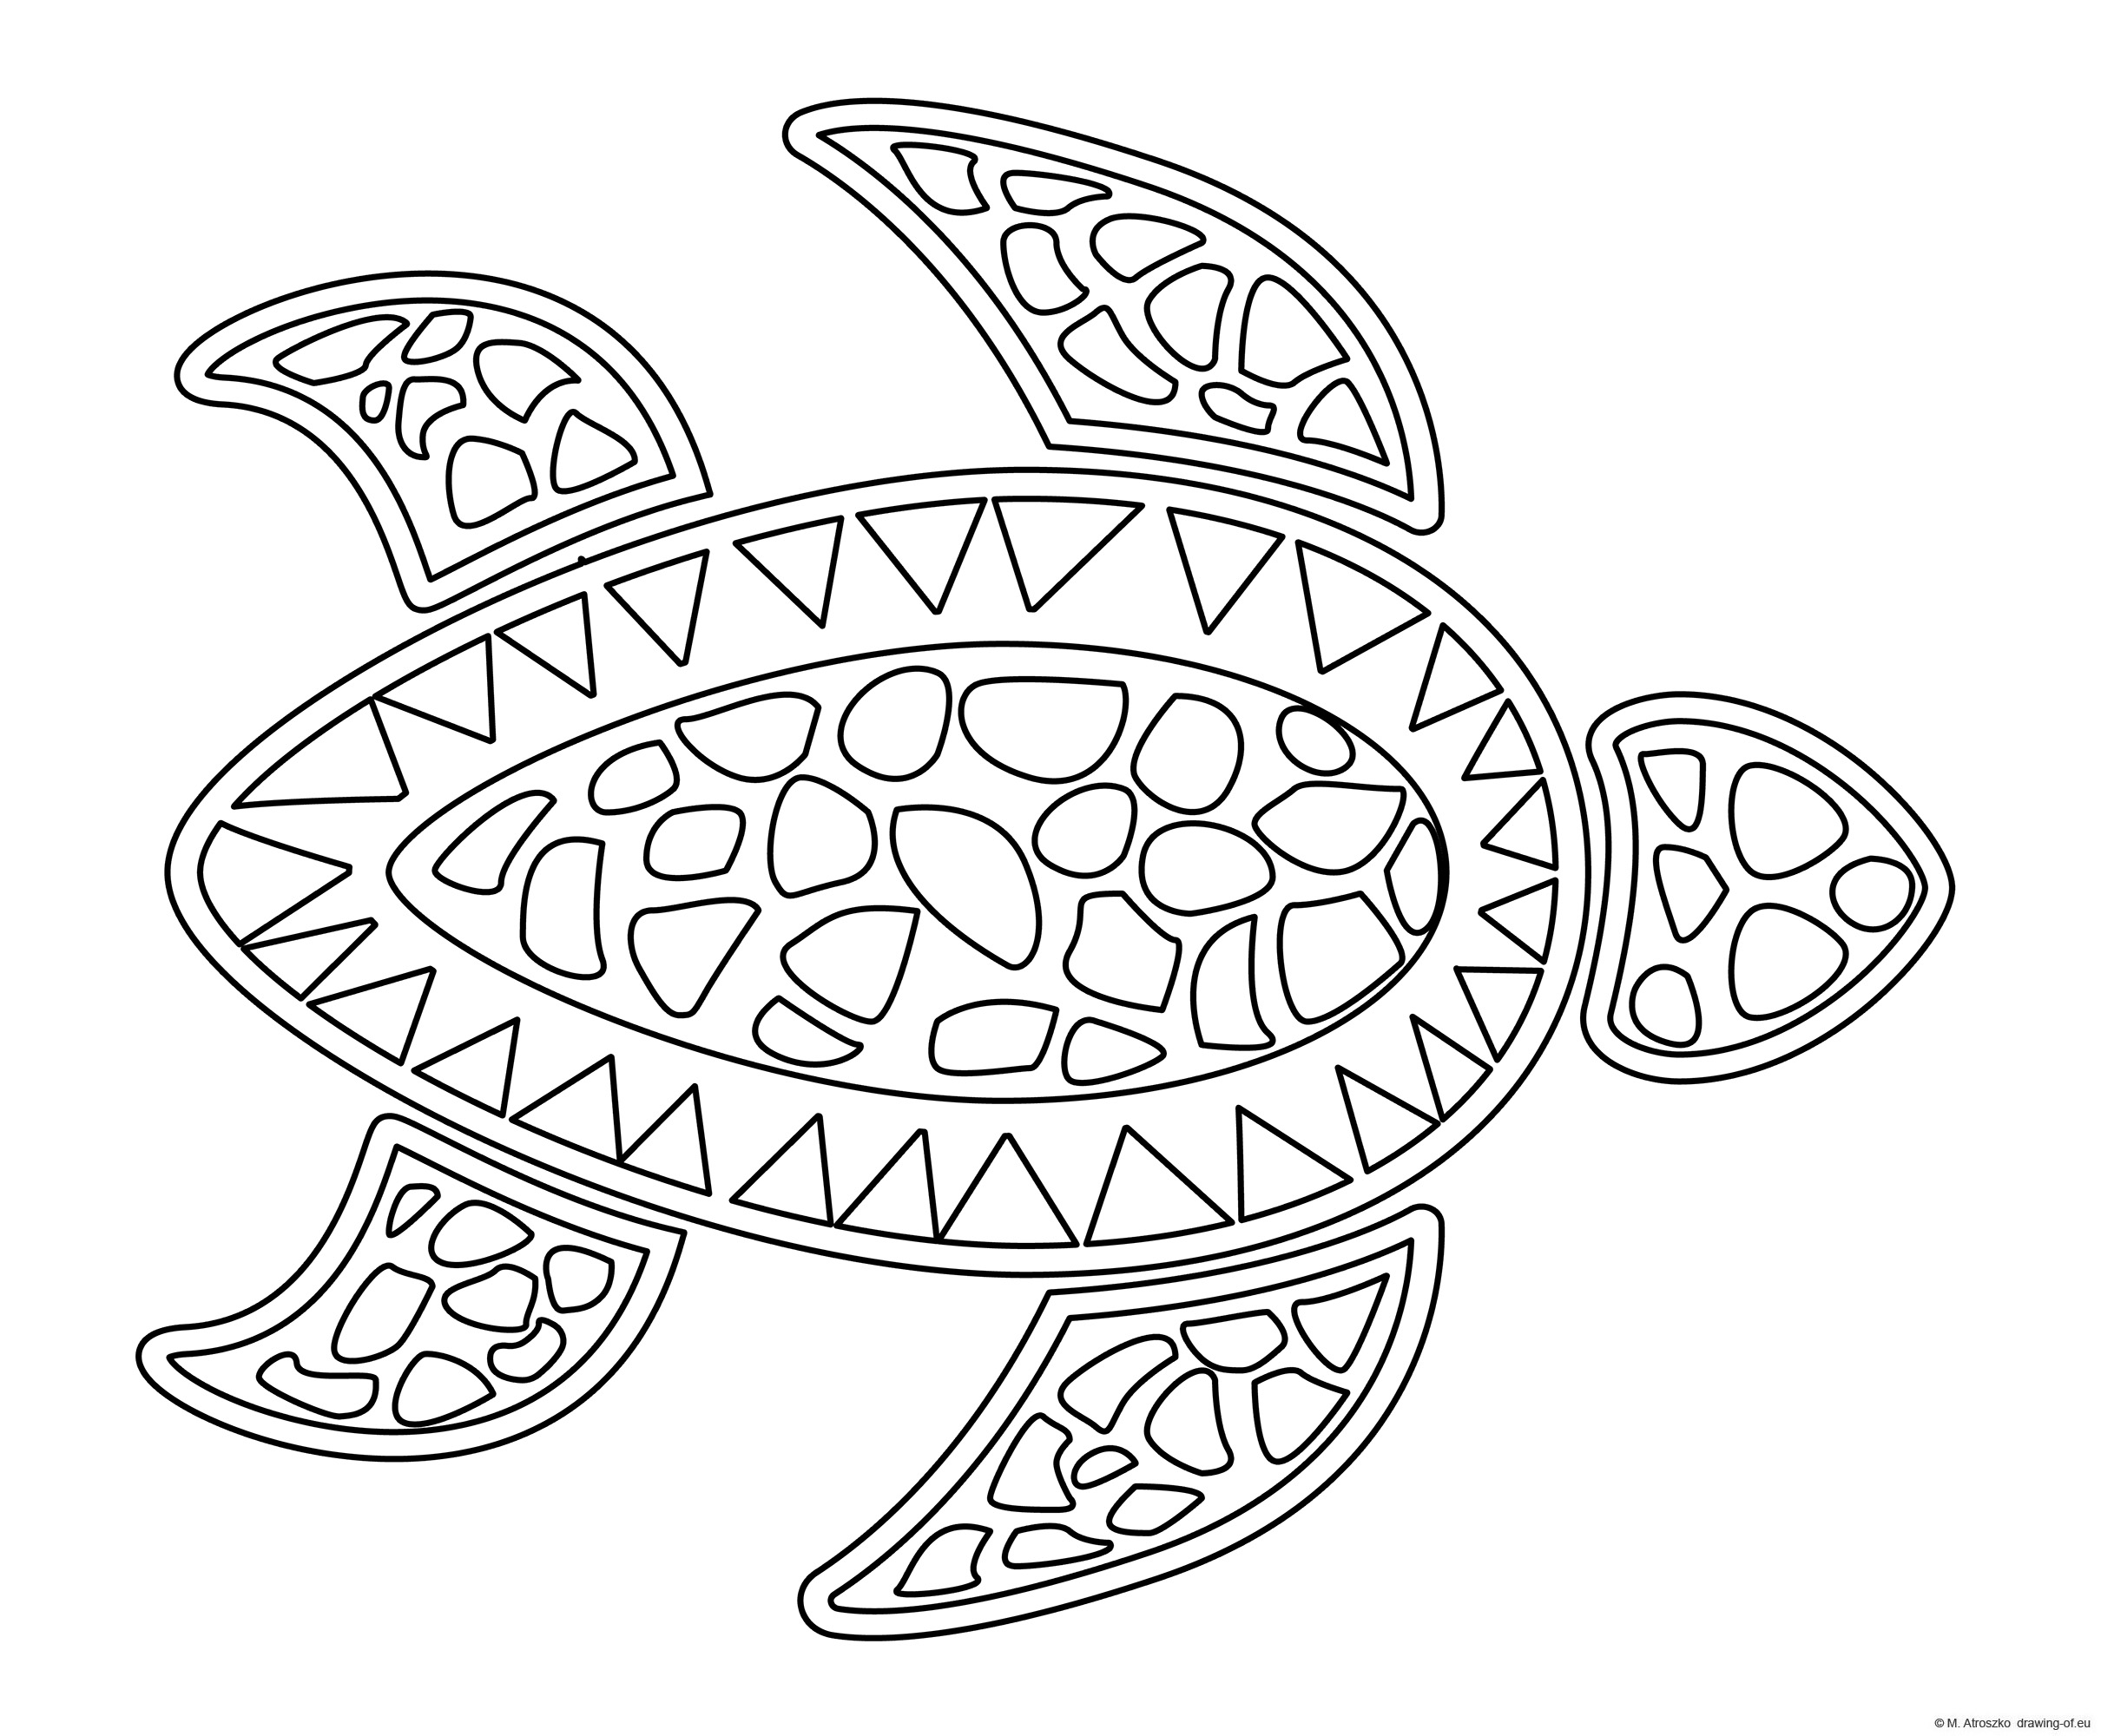 Sea turtle pattern coloring page